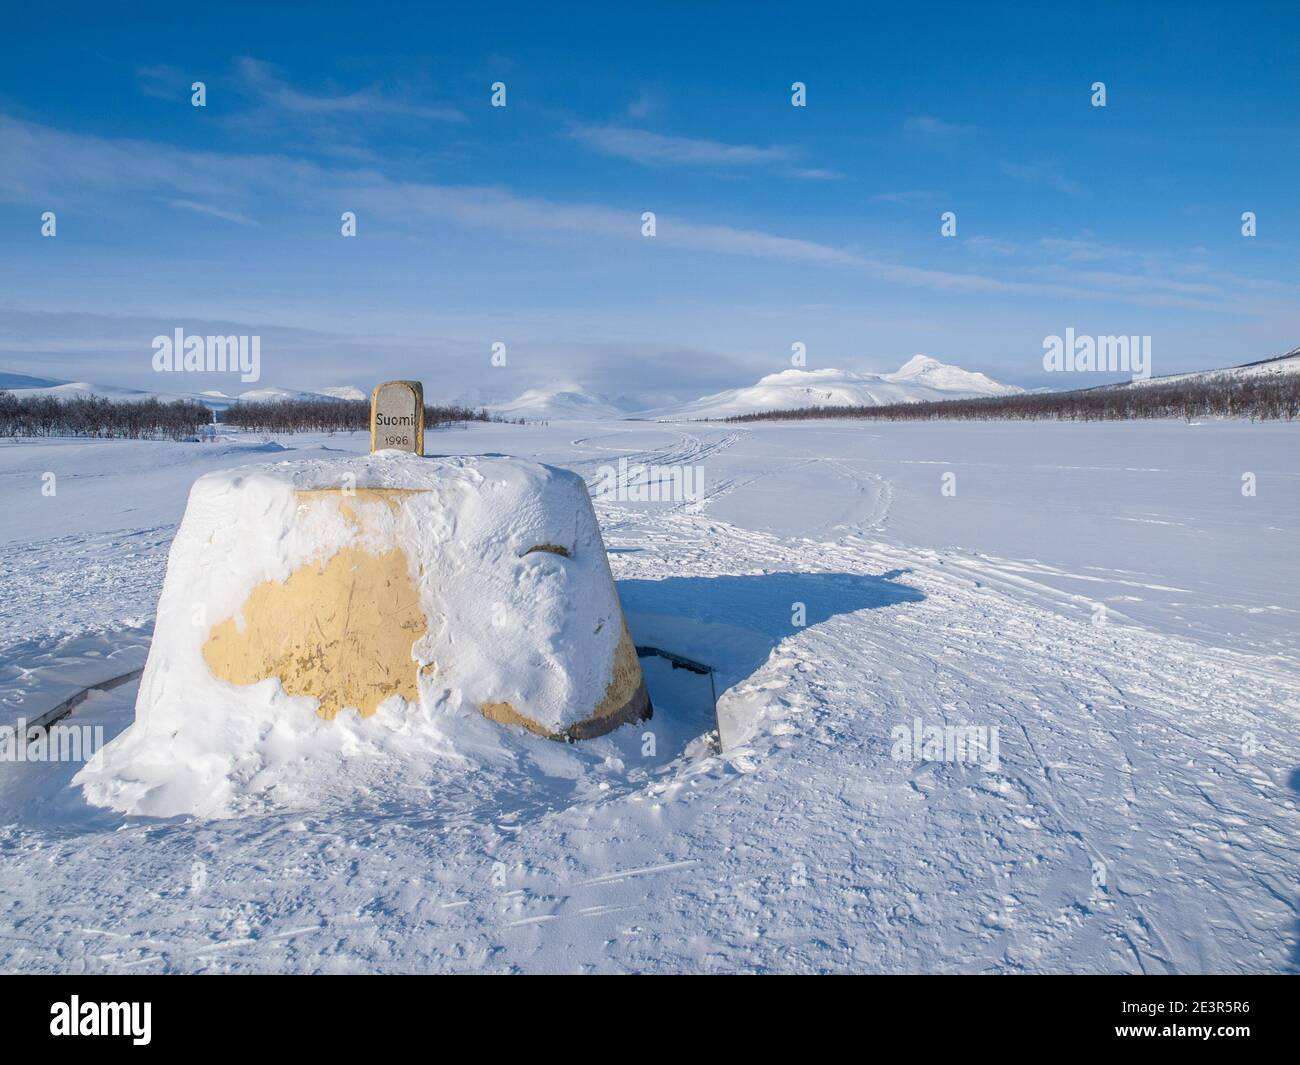 The Three Border Stone / Cairn marking the border between Finland, Norway and Sweden near Kilpisjarvi,  in winter Stock Photo